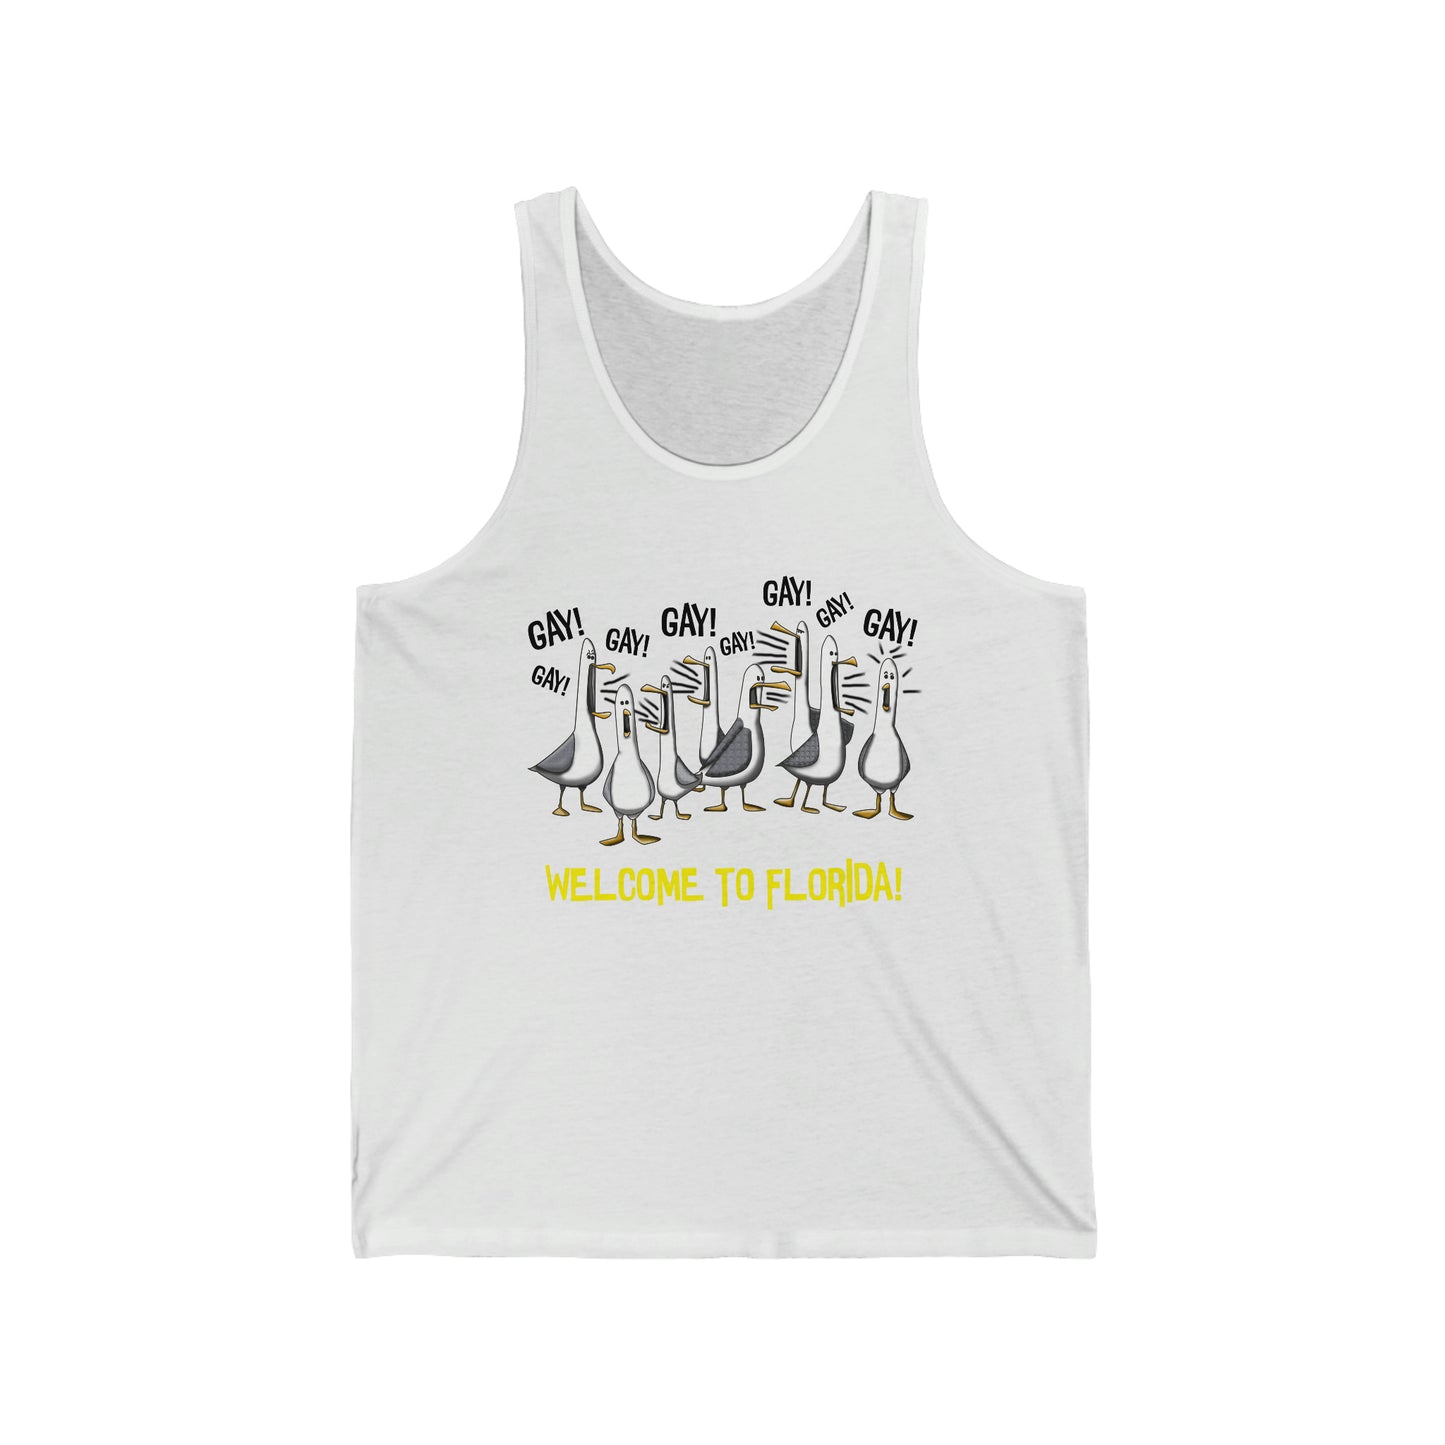 Screaming GAY! Seagulls - Welcome to Florida! Adult Unisex Tank Top